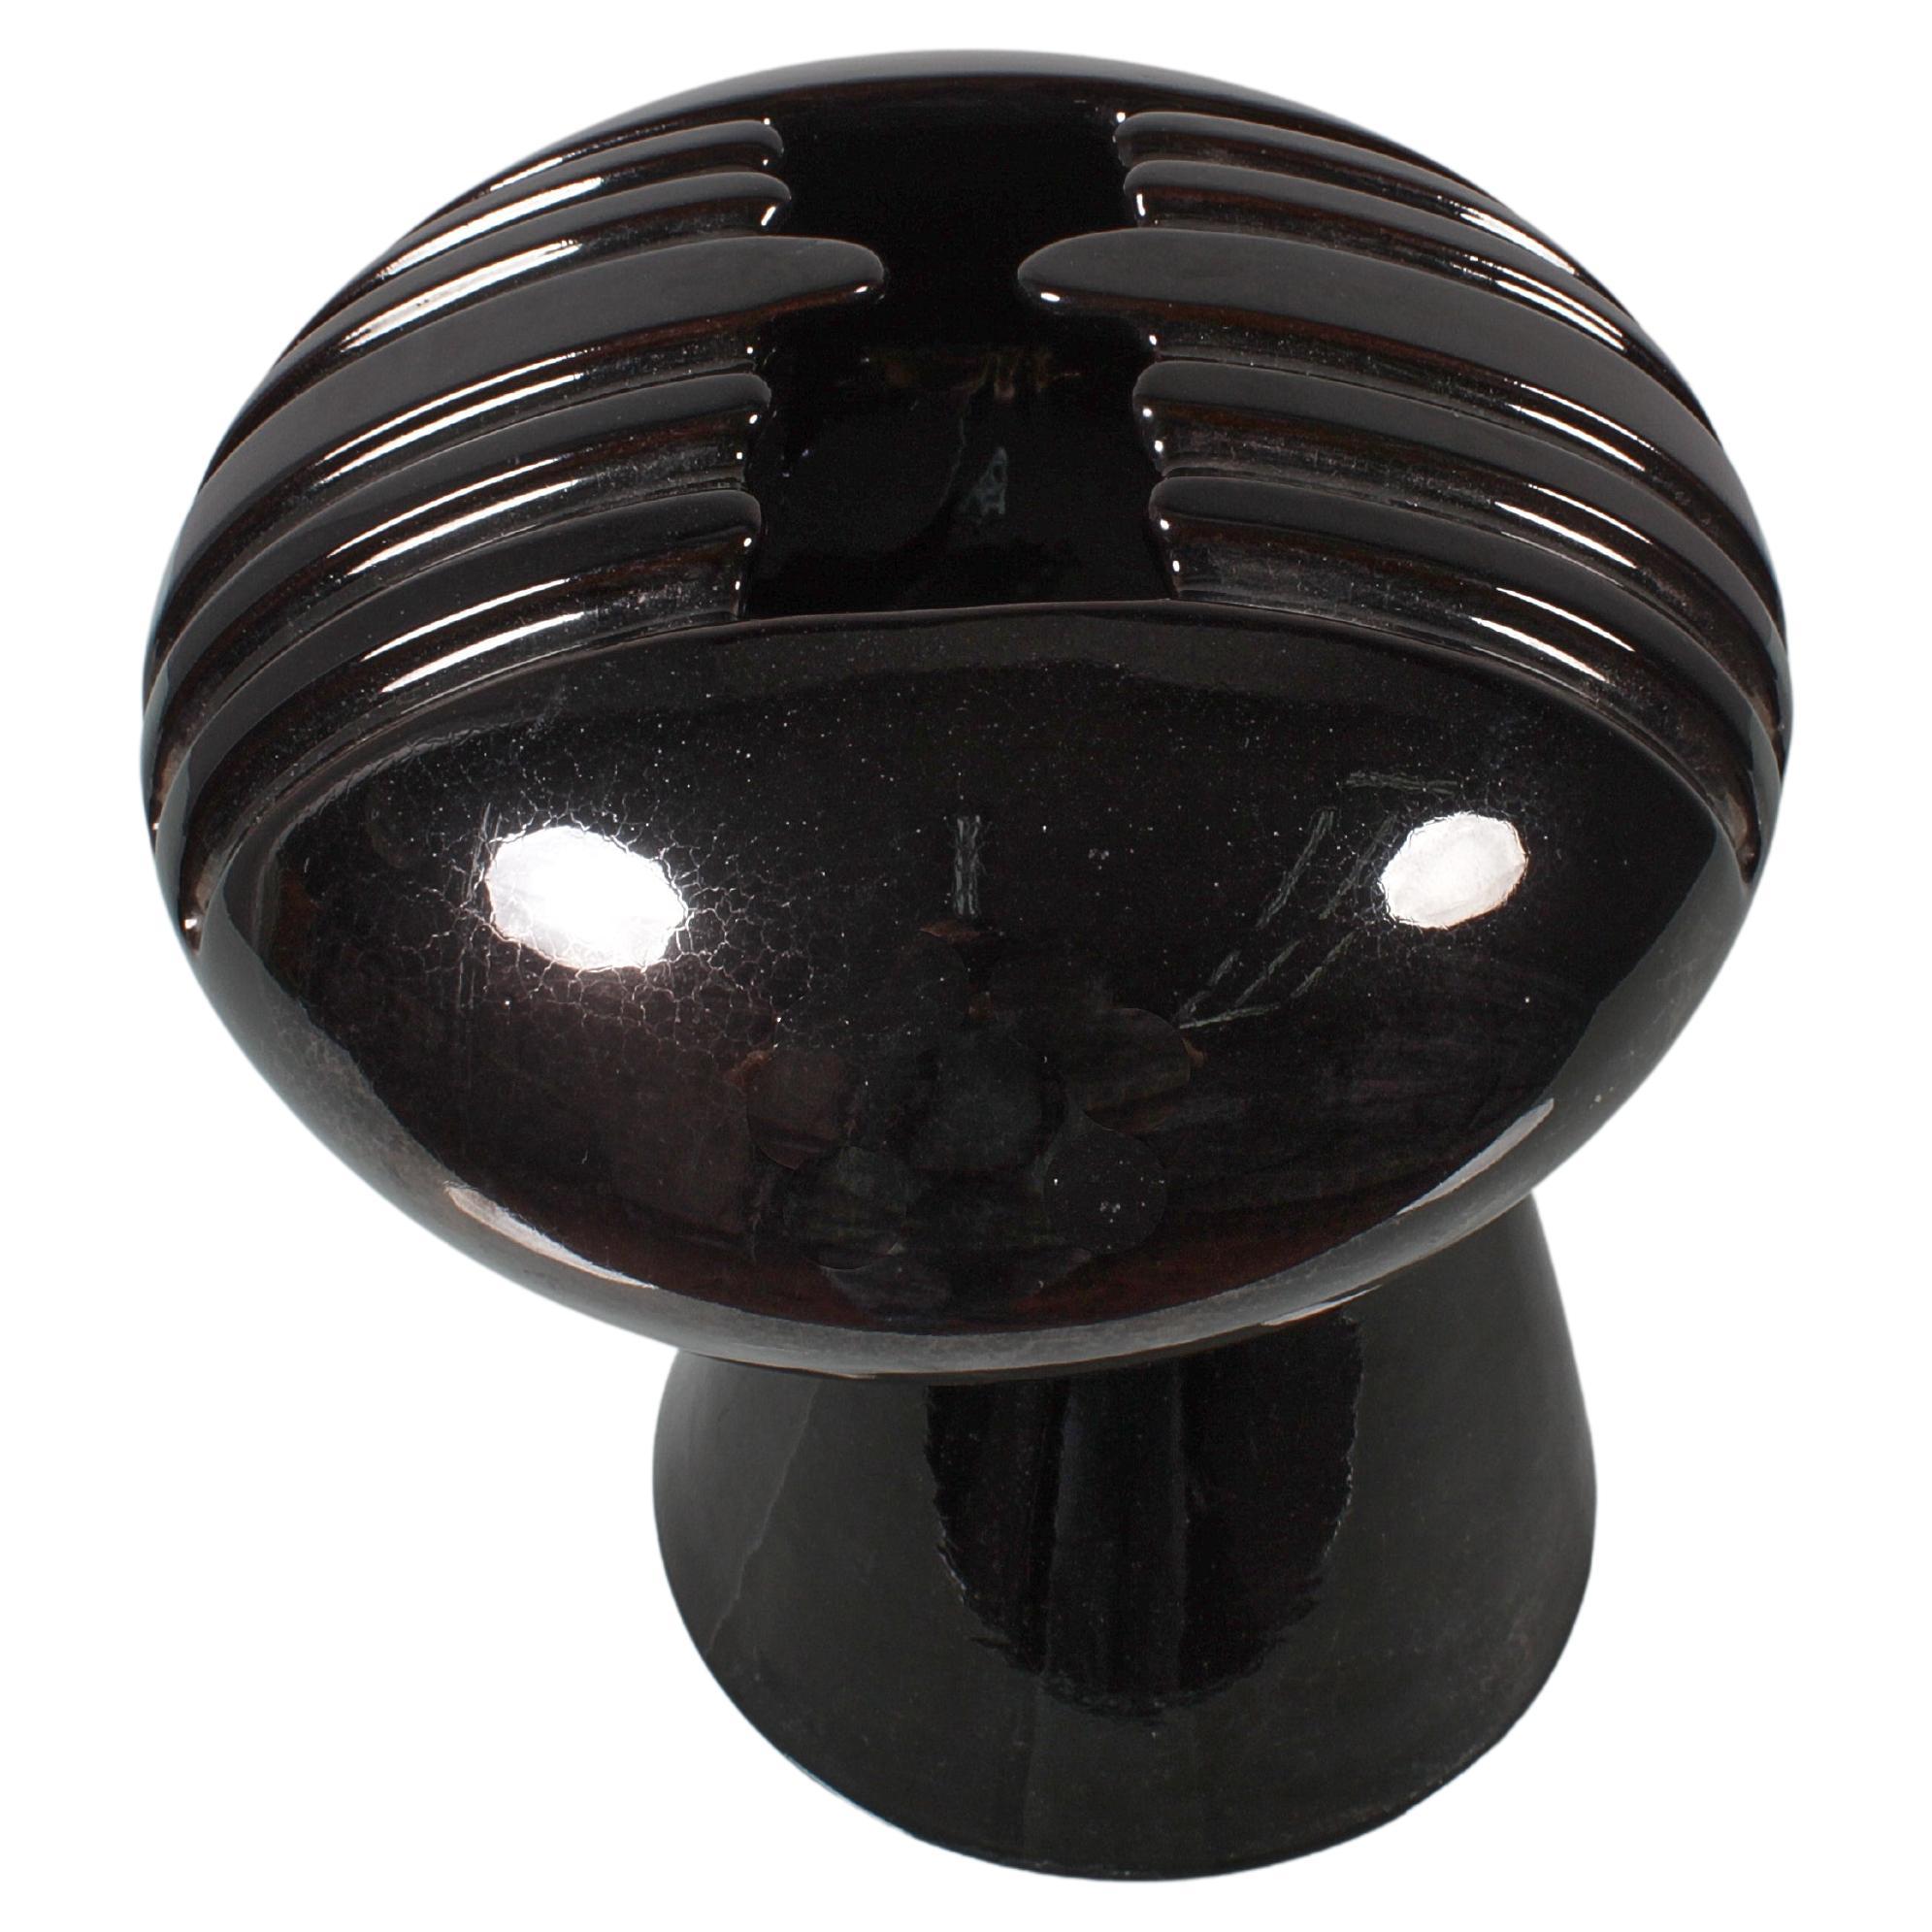 Beautiful Space Age style vase in black glazed ceramic by Enzo Bioli for Il Picchio, with manufacturer's mark under the bottom. Italian production from the 70s.
Wear consistent with age and use.
 